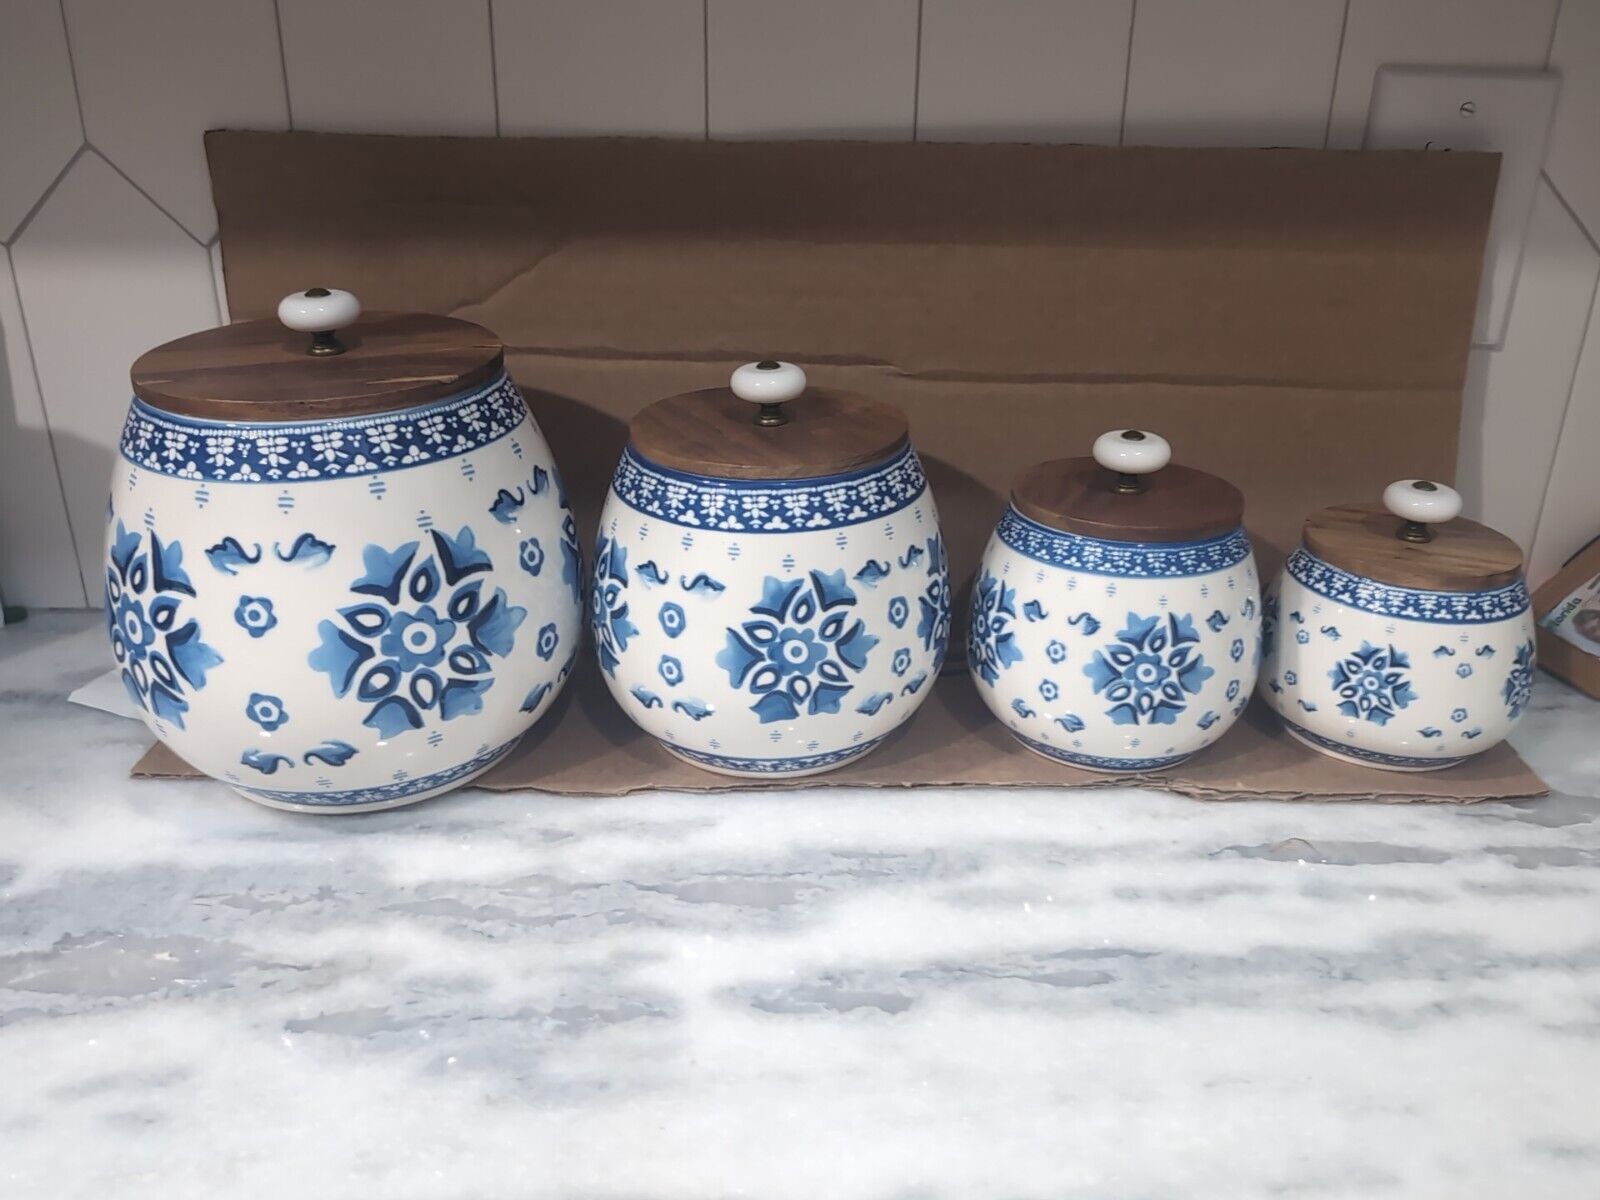 Four Opalhouse Ceramic Canister Blue On White, Wood Lid Ranging Large To Small